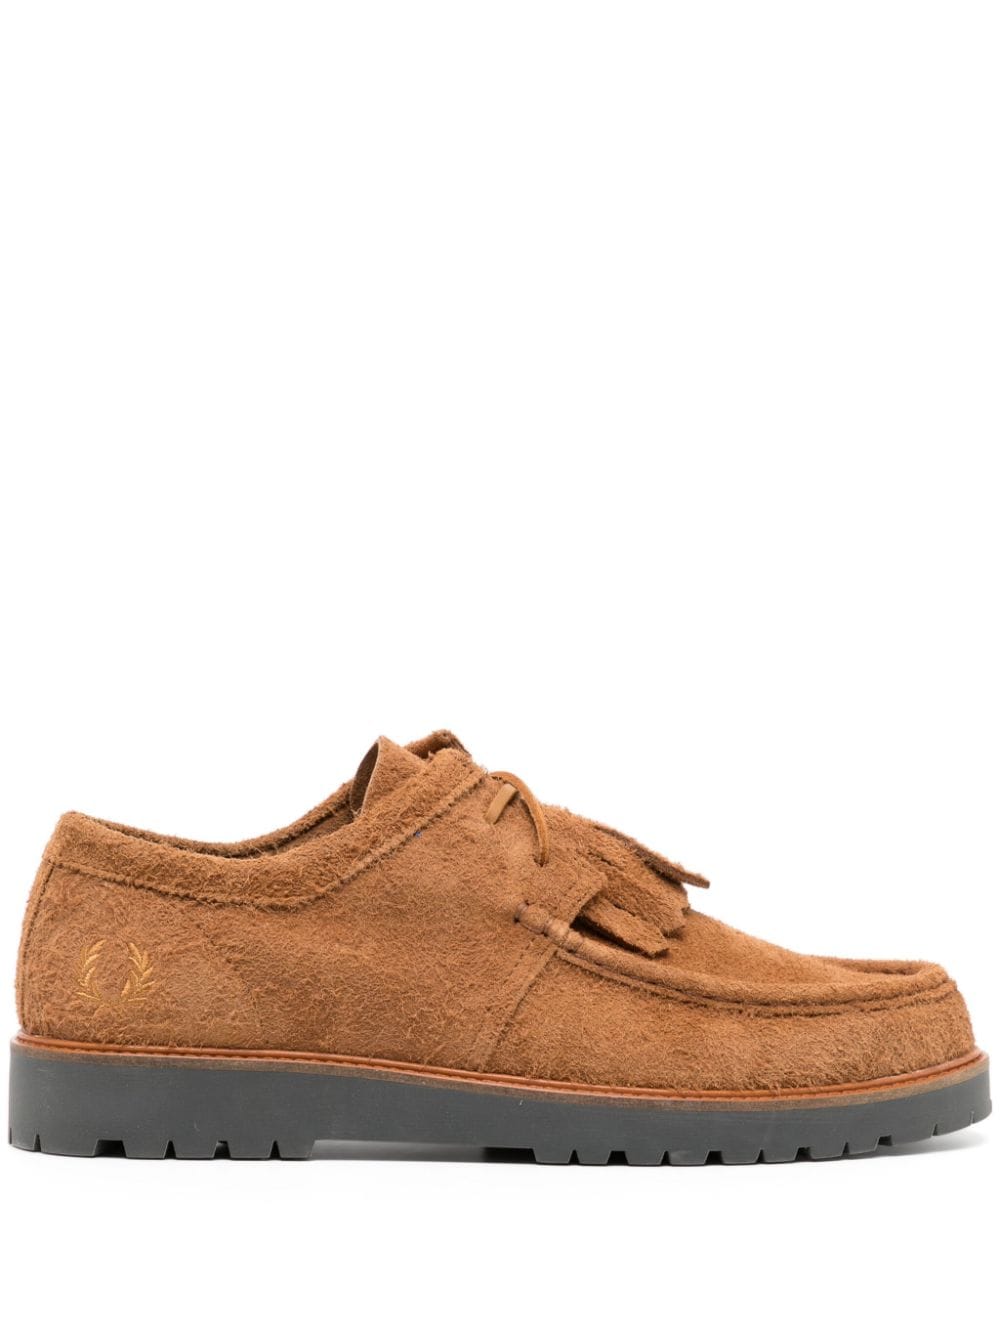 Fred Perry tassel-detailed suede loafers - Brown von Fred Perry